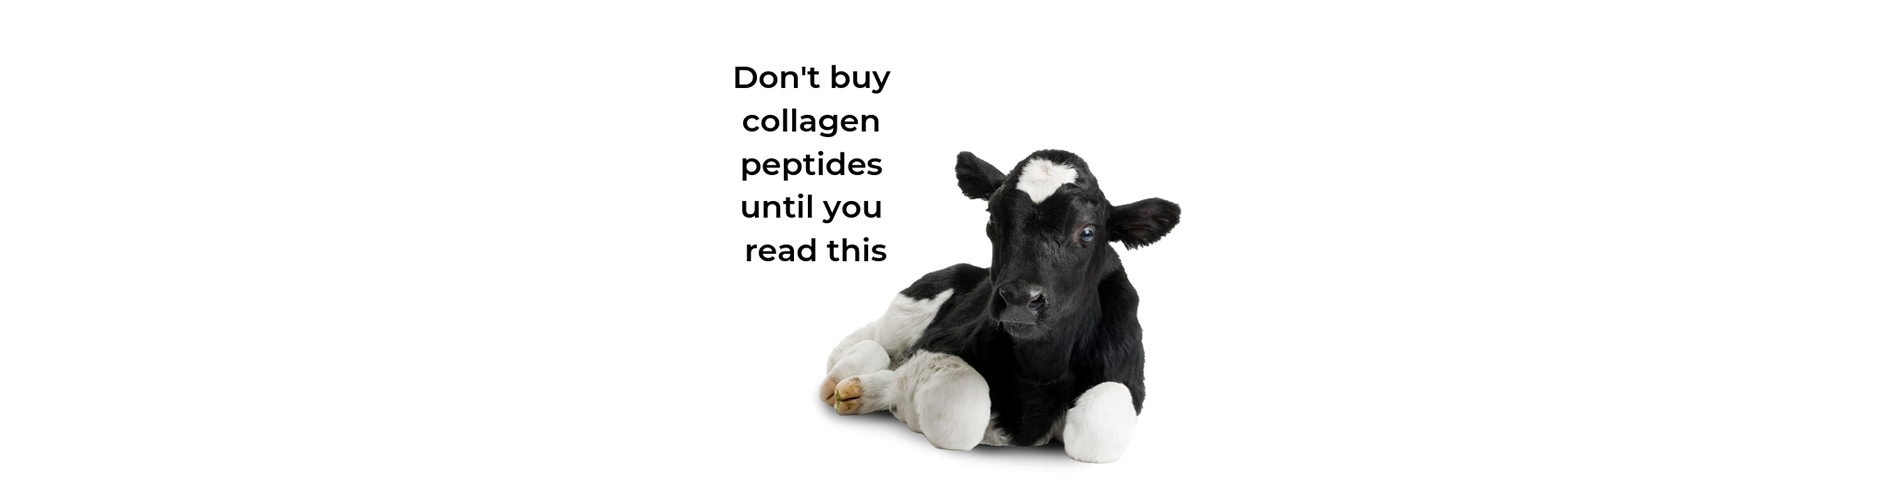 Hot Product or Hoax - Do Collagen Peptides Work?